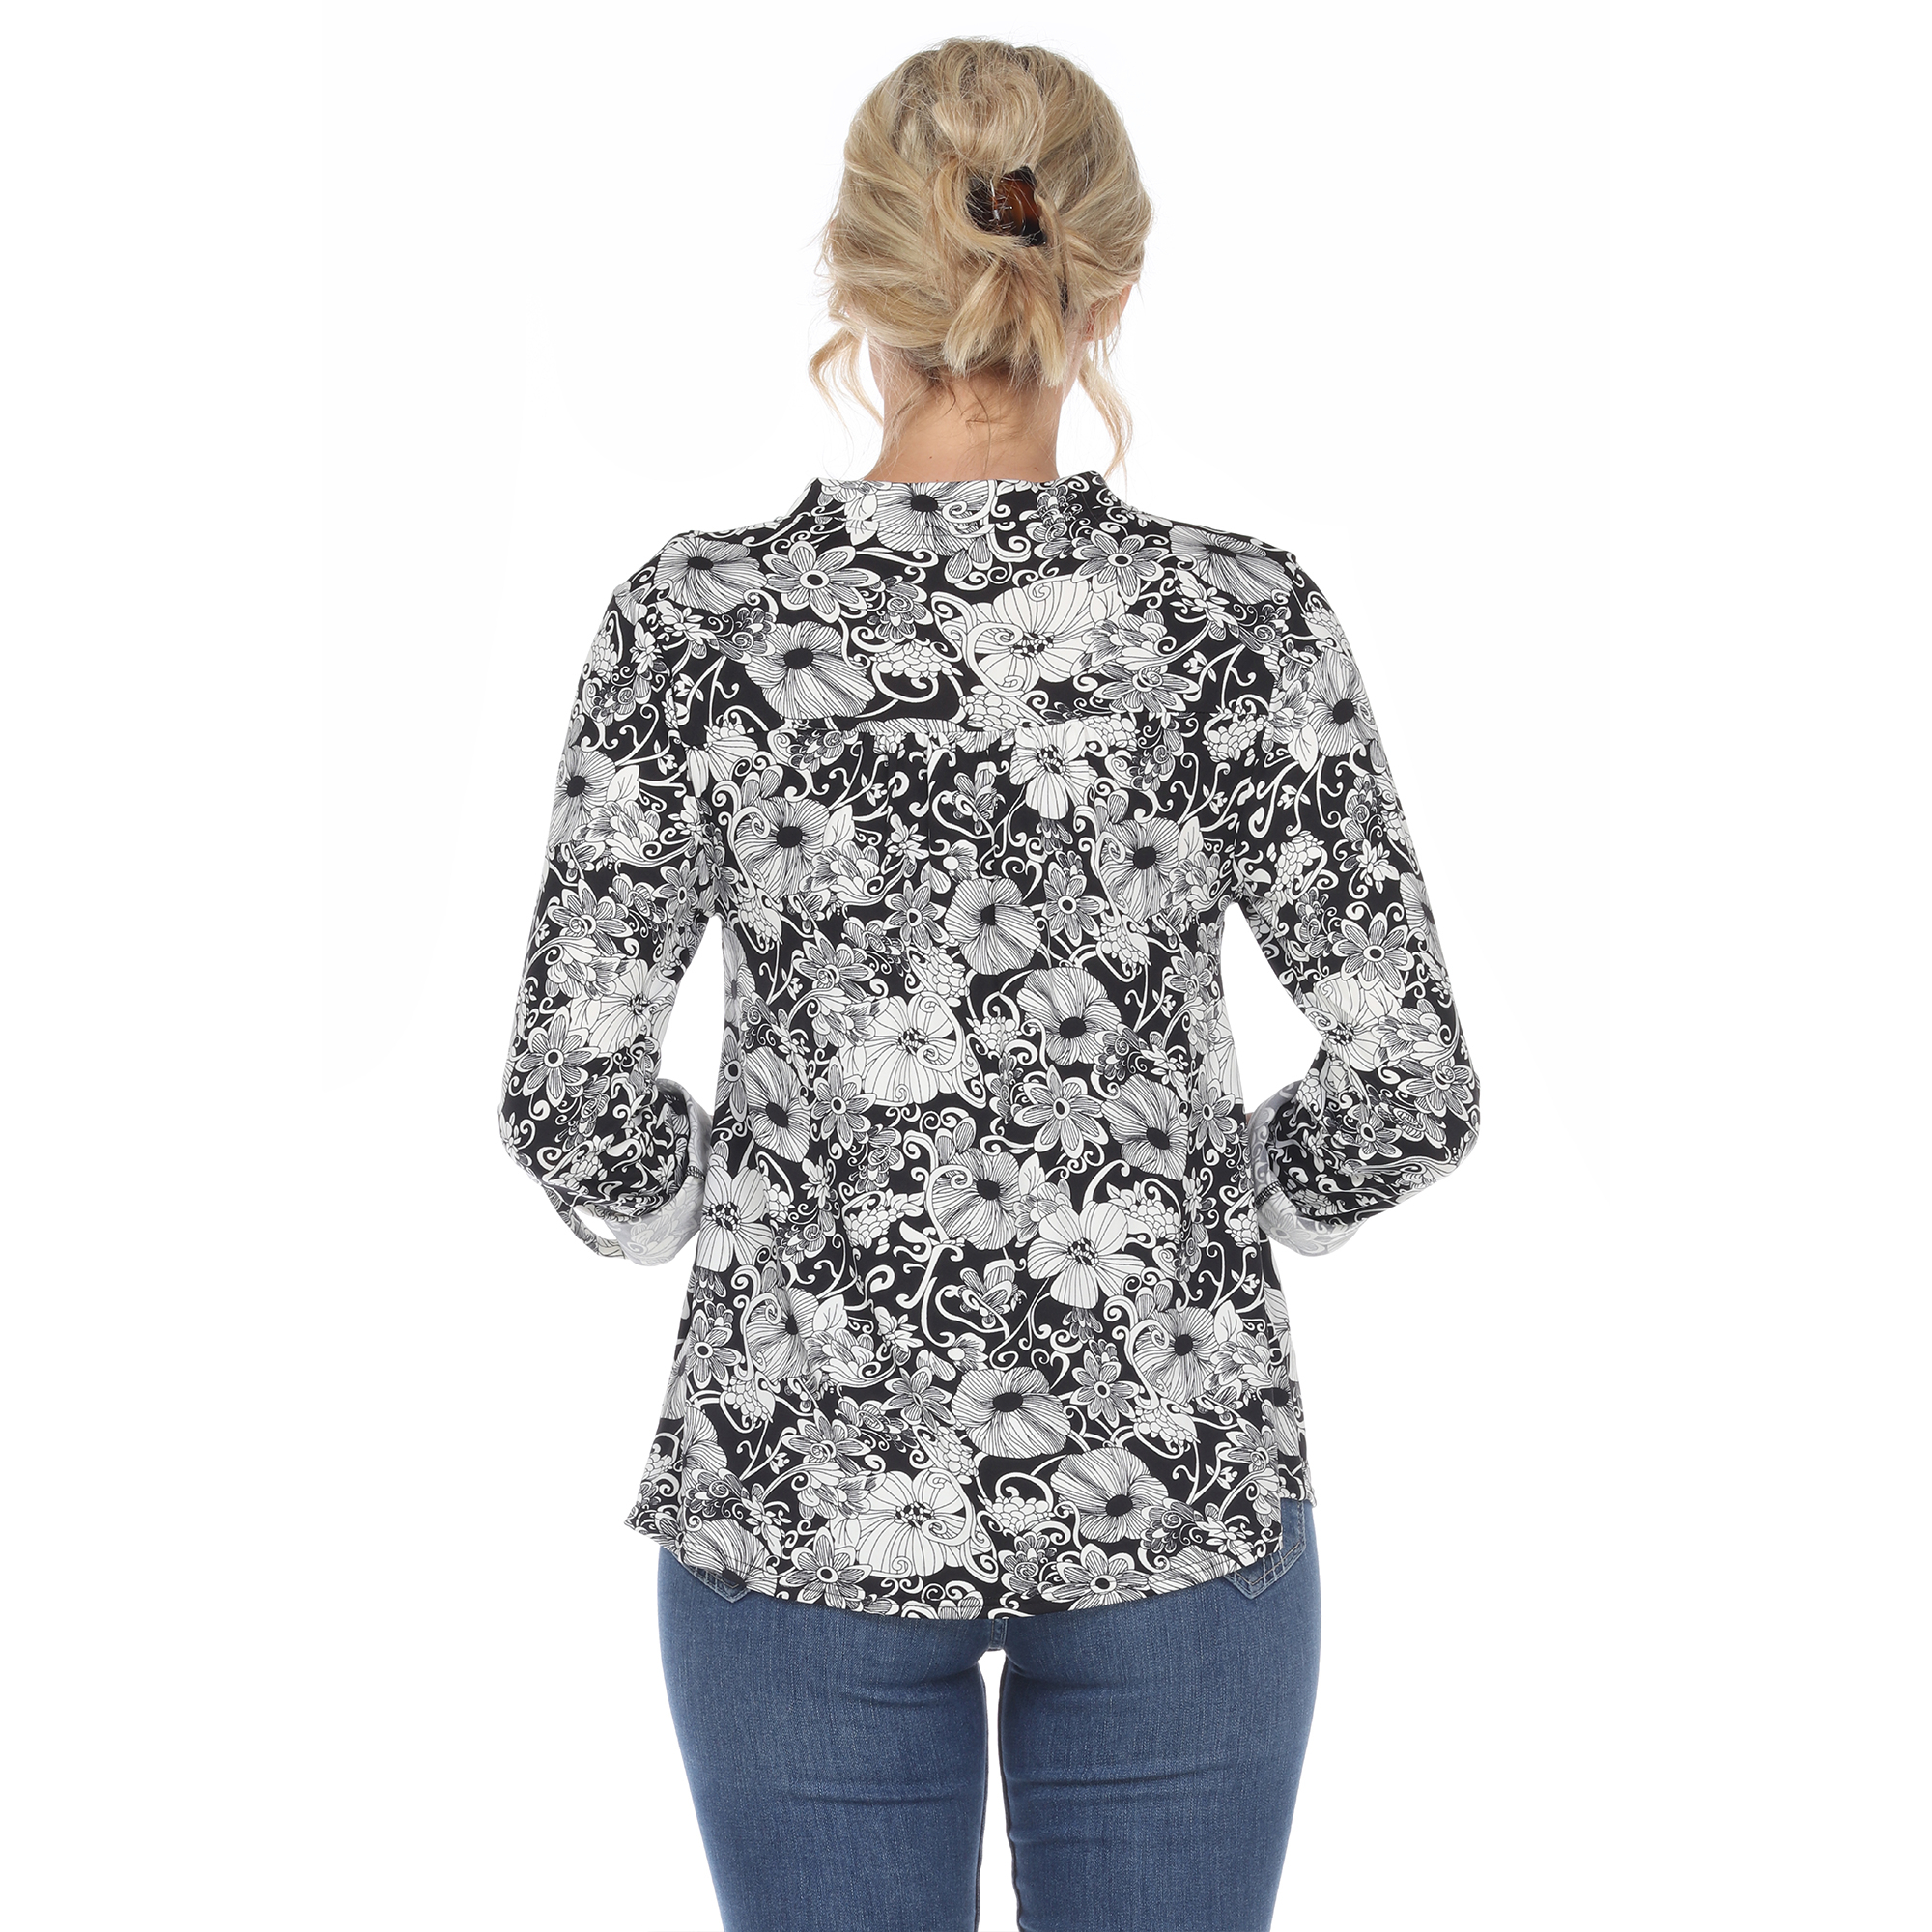 White Mark Women's Pleated Long Sleeve Floral Print Blouse - Navy, 4X